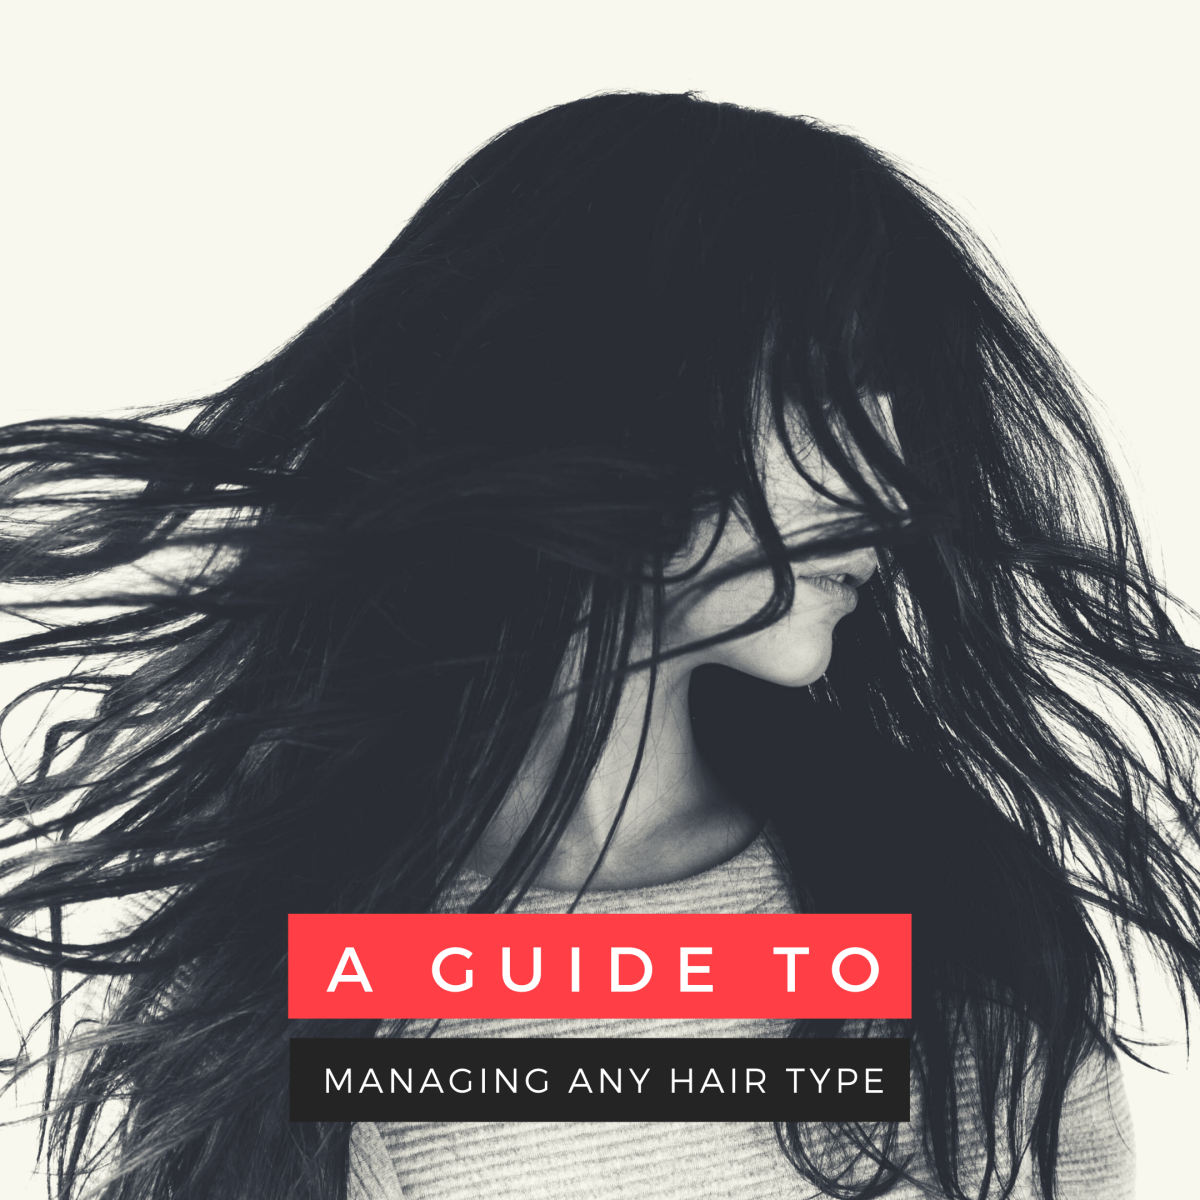 How to Manage Any Hair Type